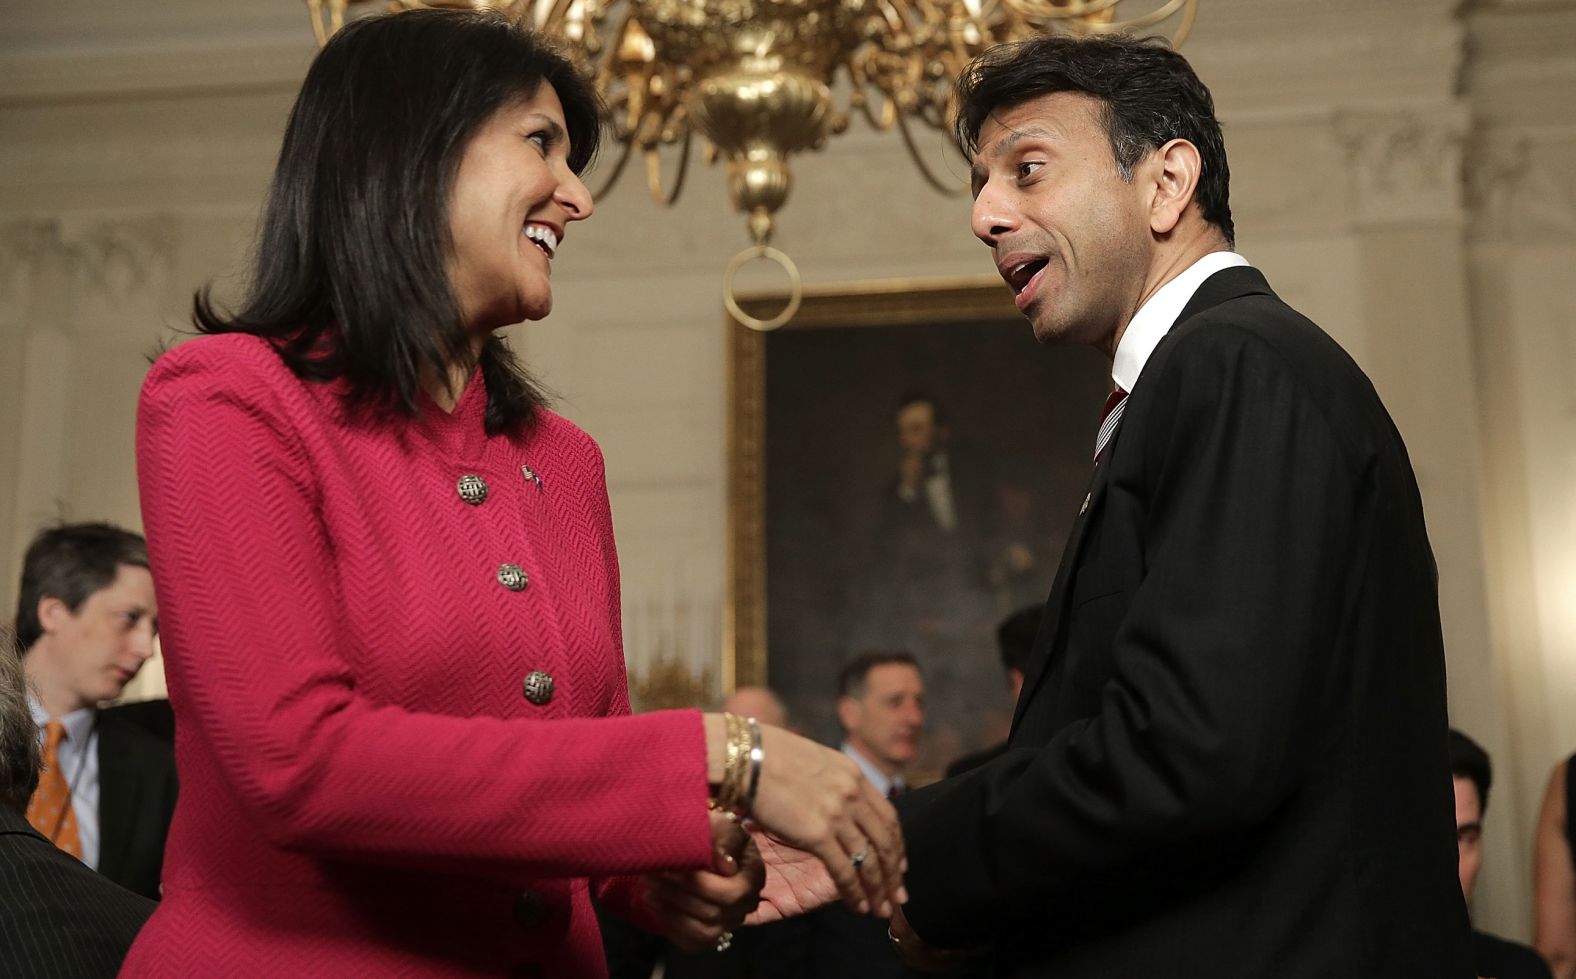 Haley talks with Louisiana Gov. Bobby Jindal during a White House event for the National Governors Association in 2015. Haley and Jindal are the only two Indian-Americans to serve as governors.